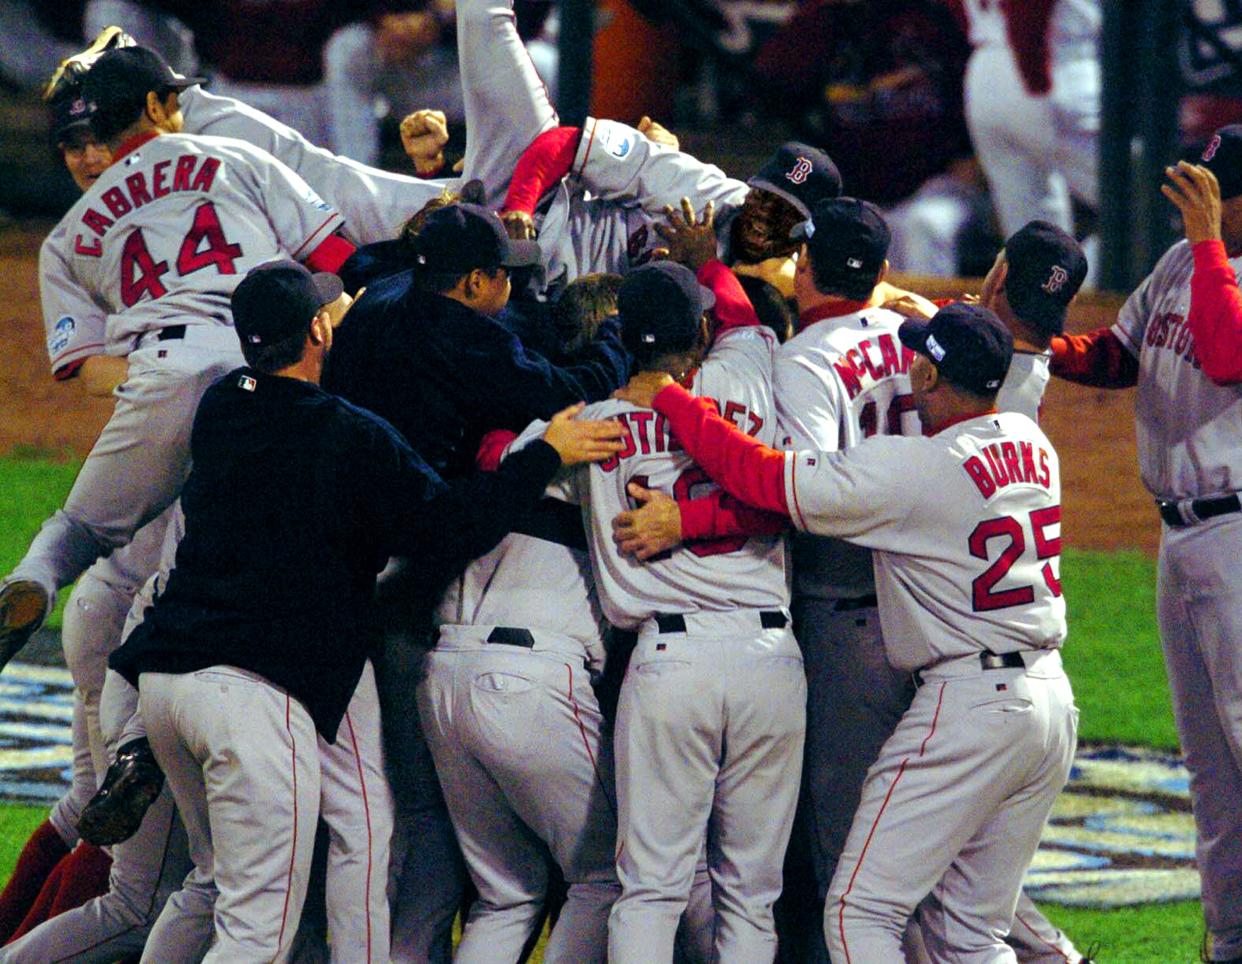 In 2004, the Red Sox celebrated their first World Series championship since 1918. How long before the Sox win another?